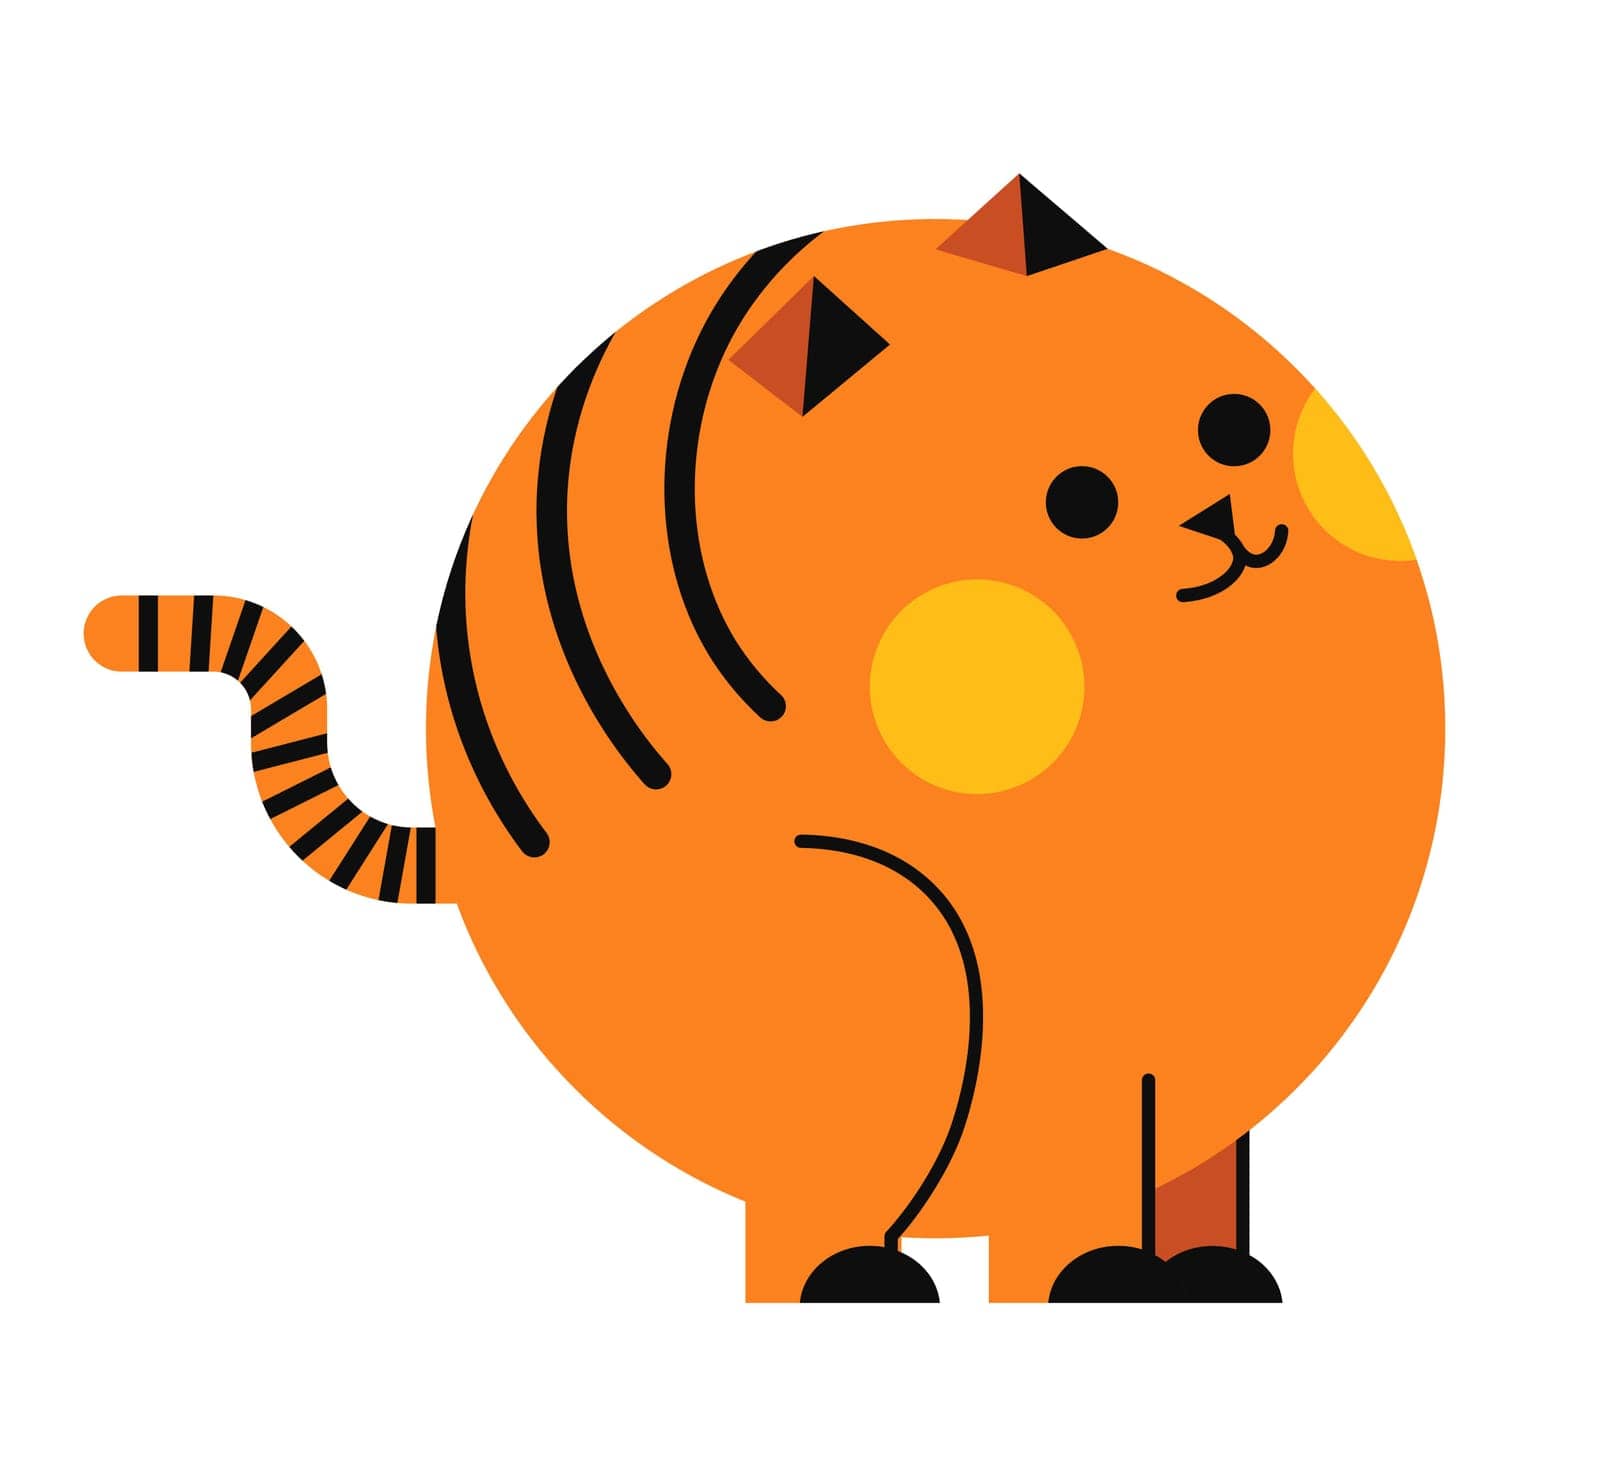 Cat or kitty personage in form of circle. Rounded feline character with paws and stripes tail, muzzle expressions and ears. Geometric shapes for kids learning geometry. Vector in flat styles